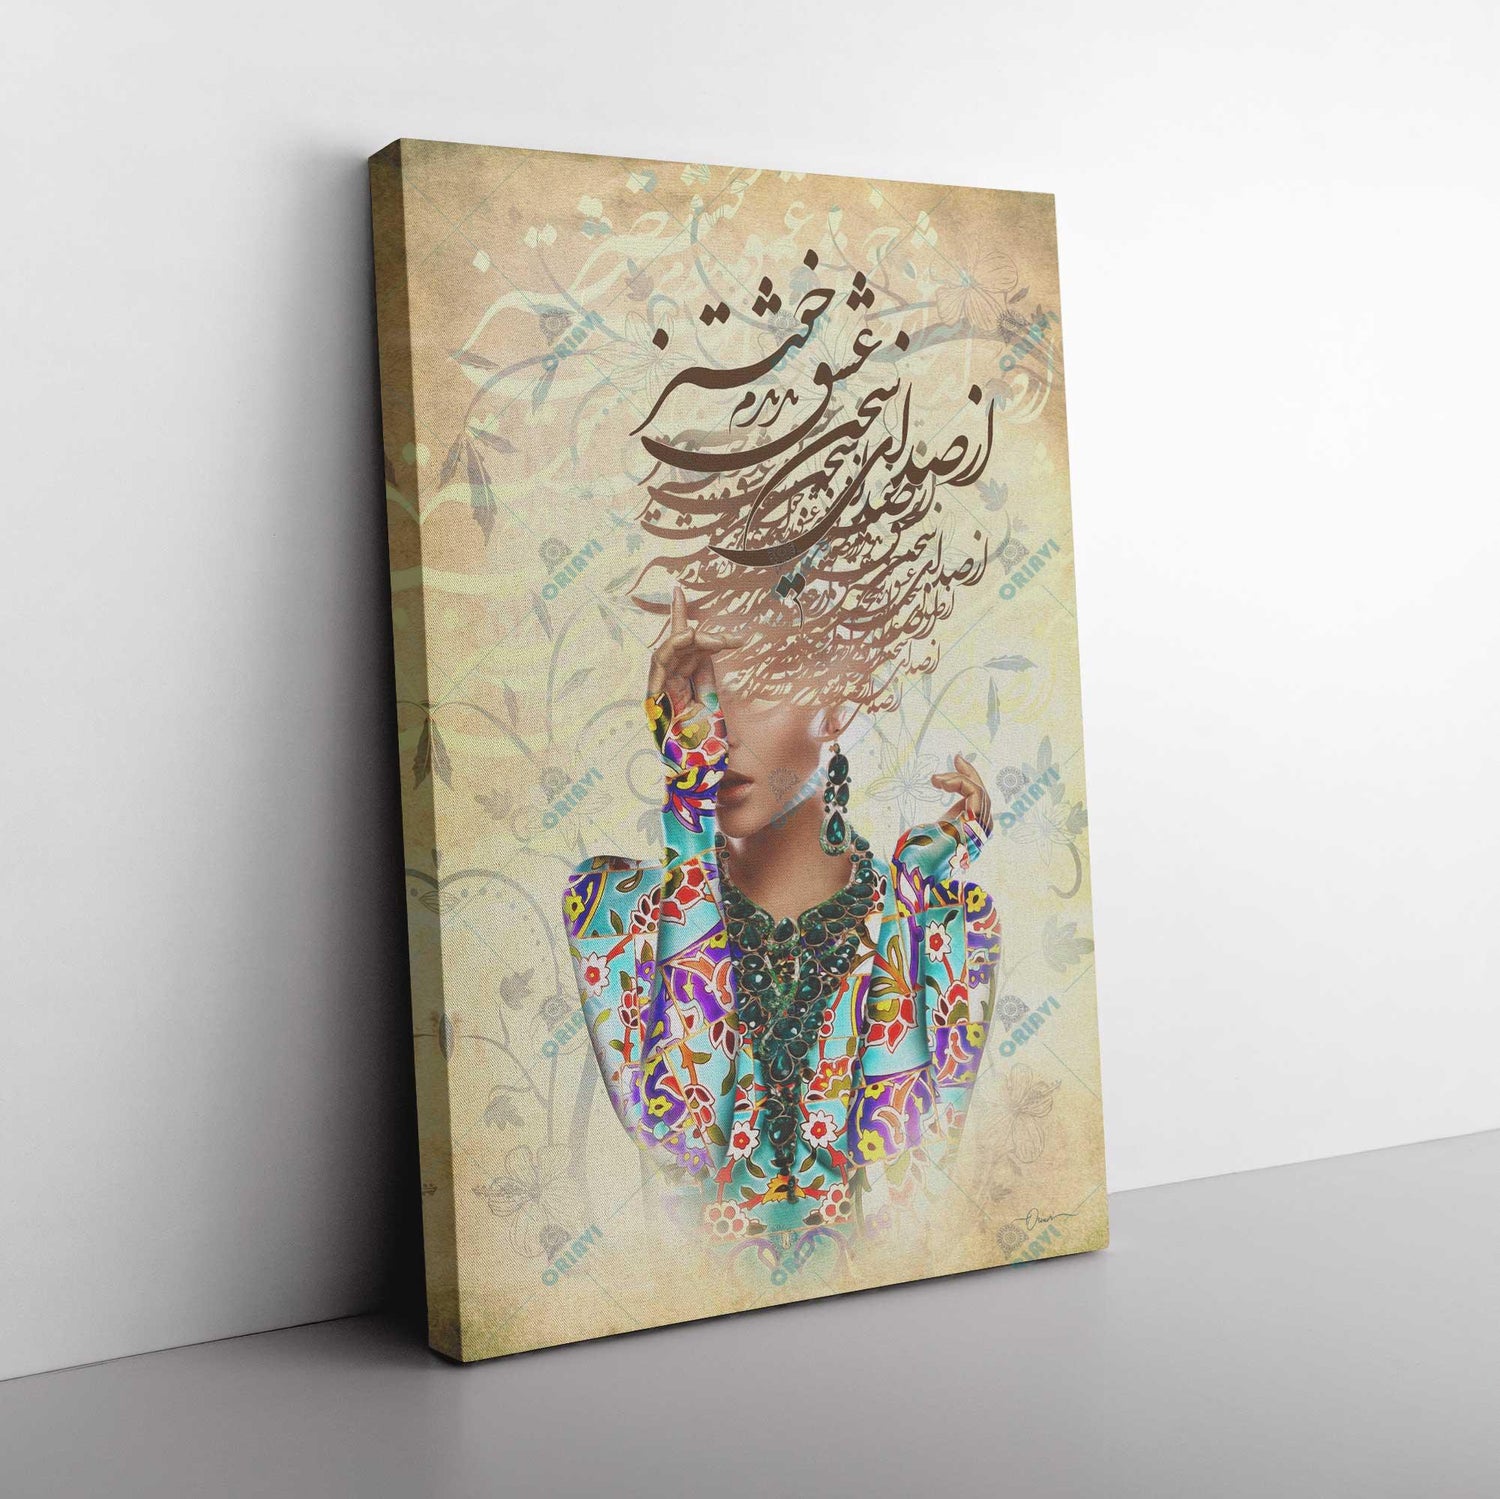 The Voice of LOVE | Persian Calligraphy Wall Art - ORIAVI Persian Art, persian artwork for sale, persian calligraphy, persian calligraphy wall art, persian mix media wall art, persian painting, persian wall art